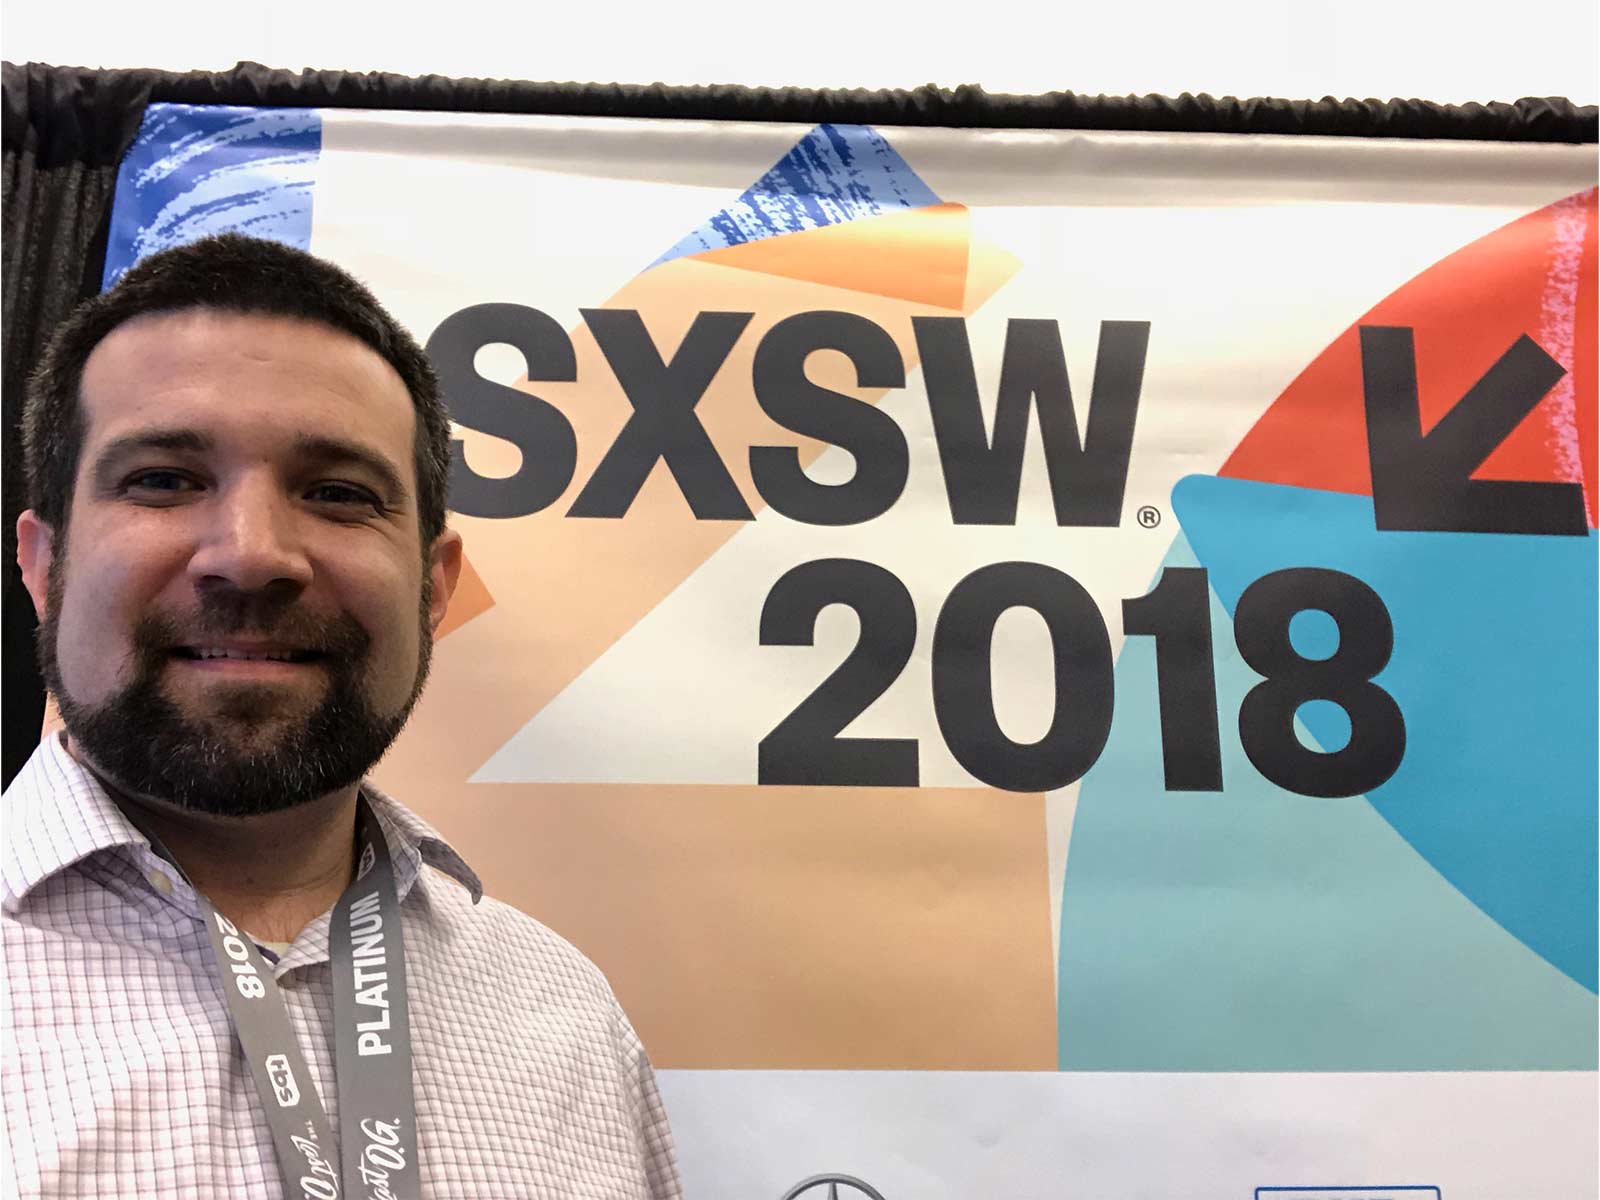 Sean Doherty in front of SXSW 2018 sign